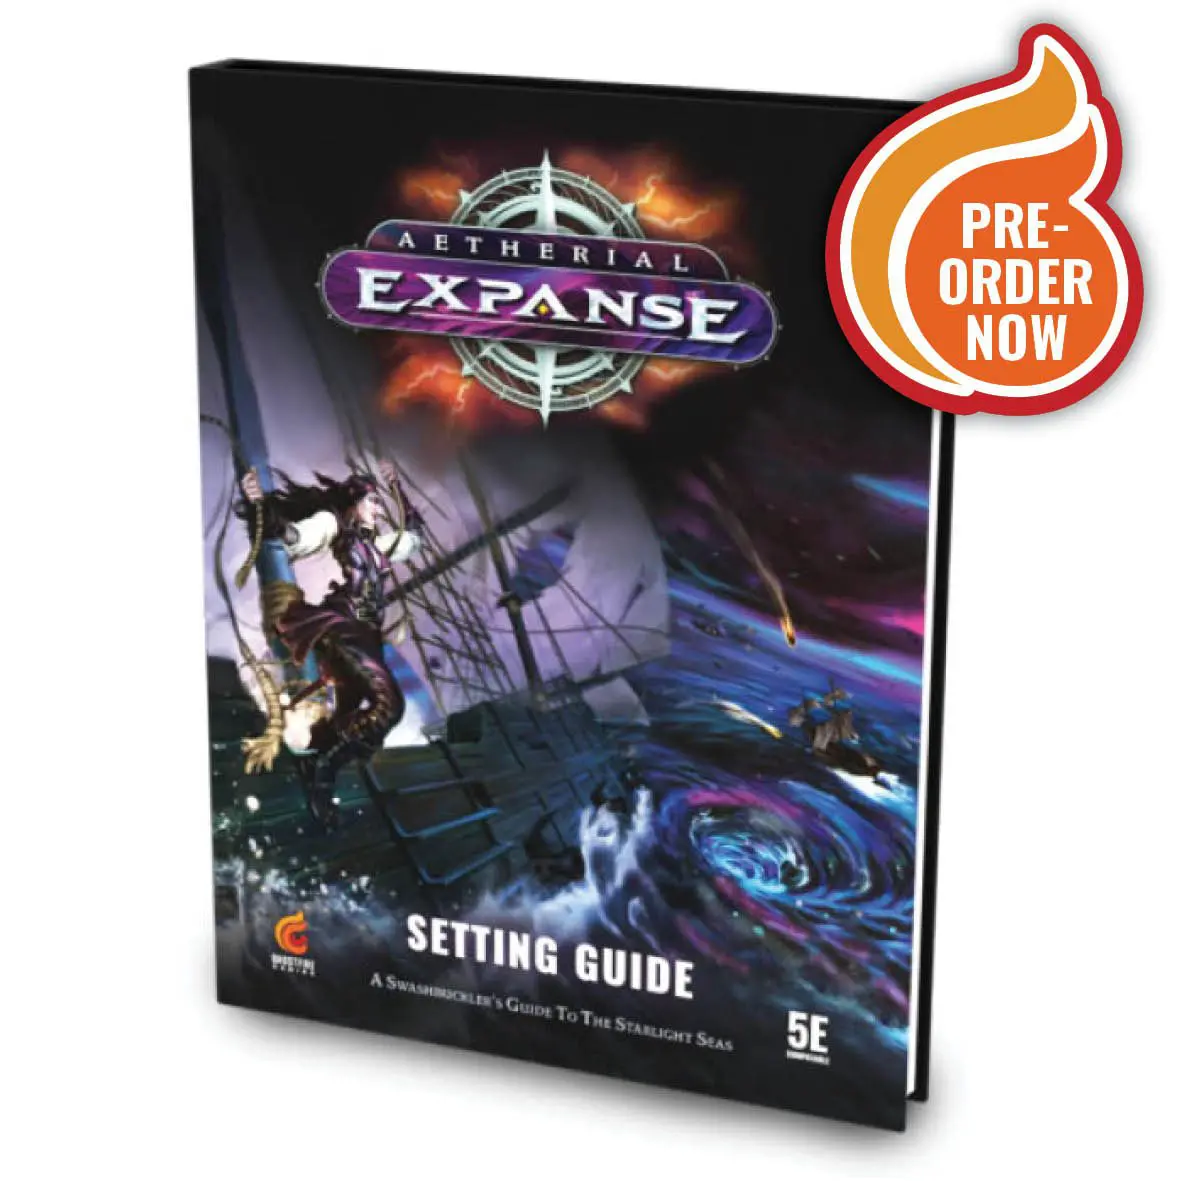 Aetherial Expanse: Setting Guide [Hardcover Book]